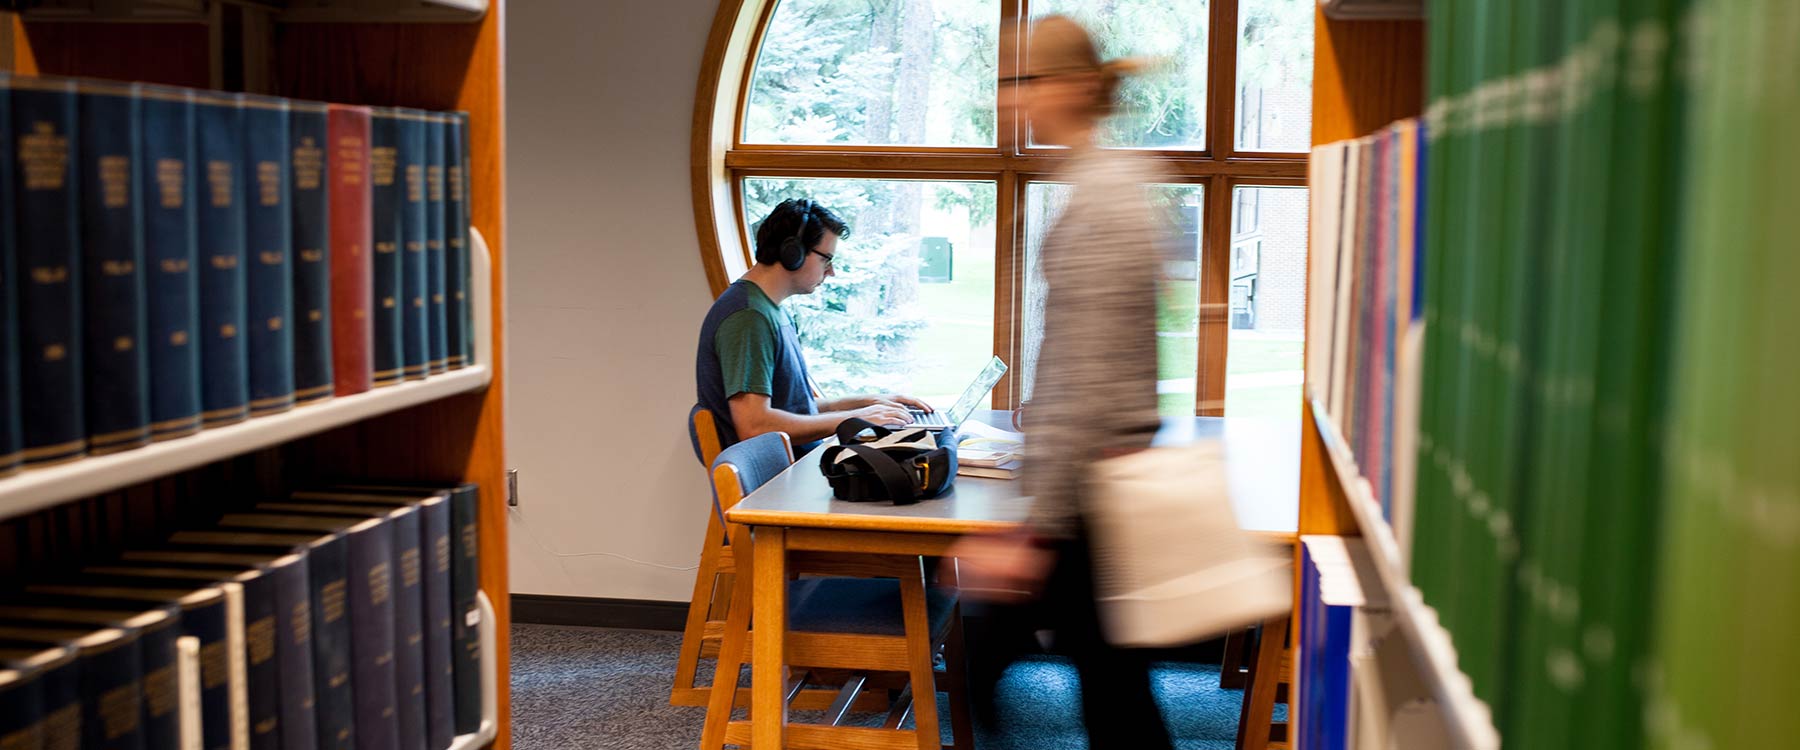 Person studying at a library table near a round window; another person walking past the bookshelves.